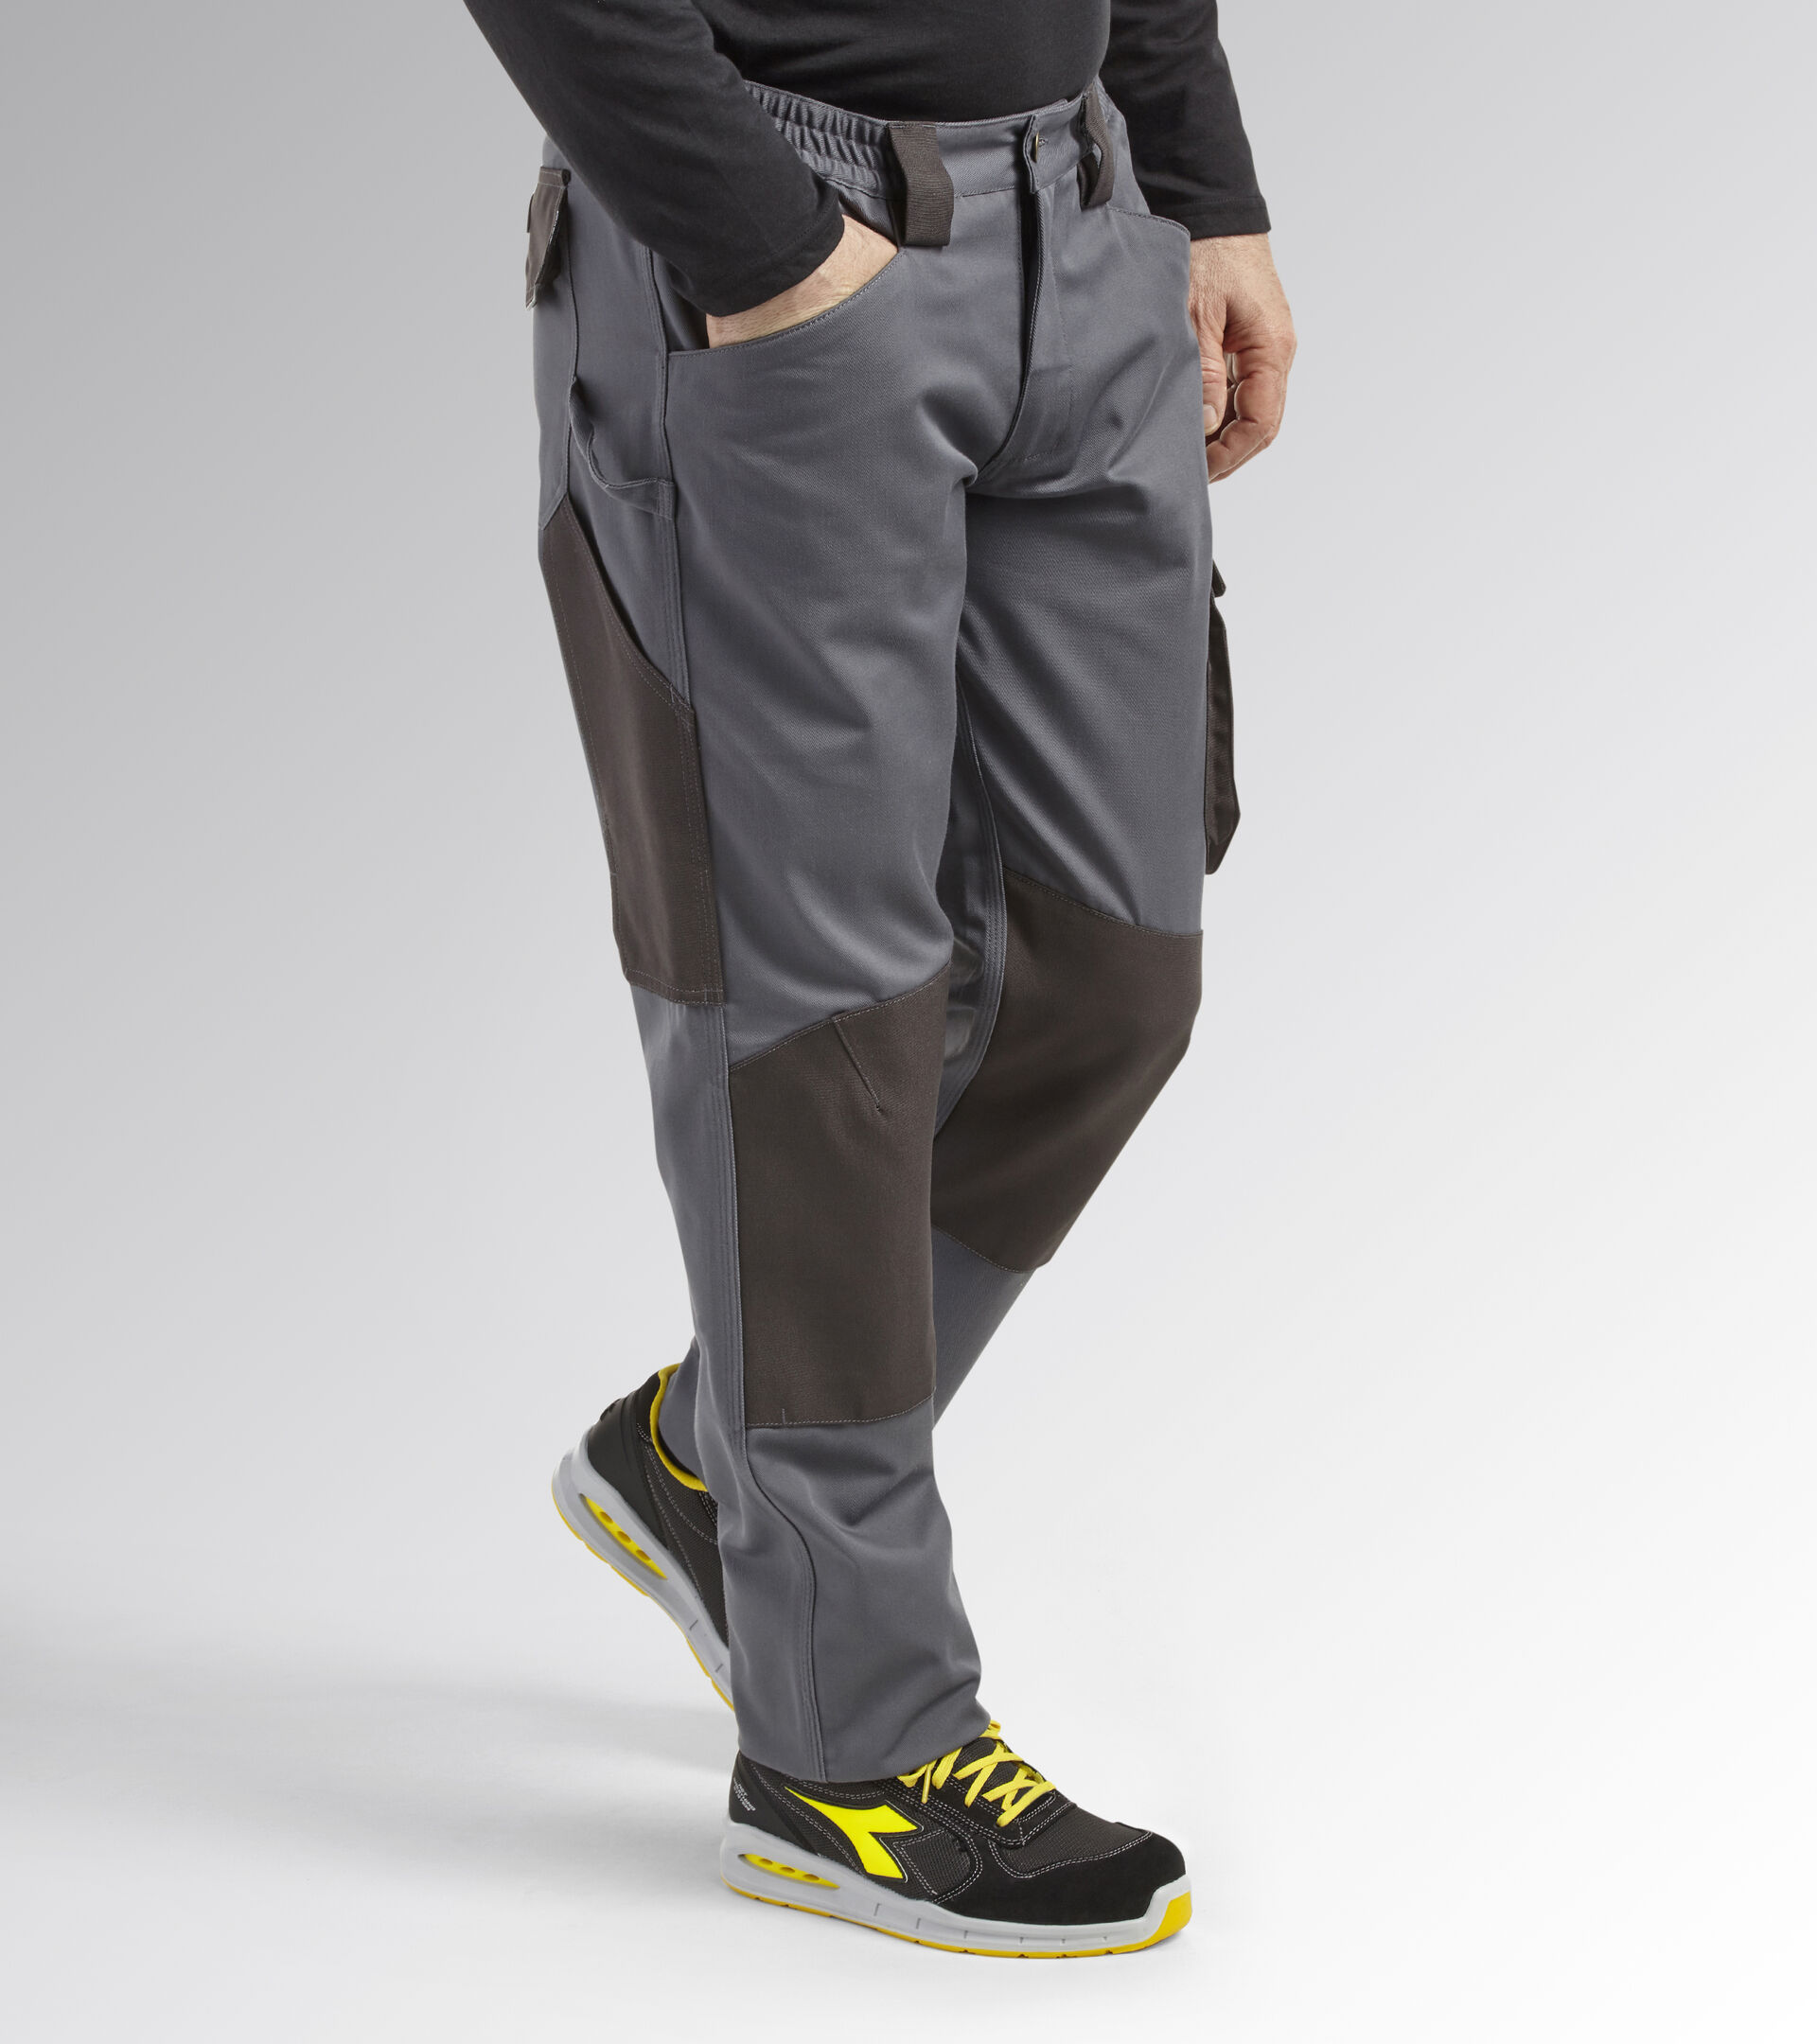 Work trousers PANT ROCK WINTER PERFORMANCE STEEL GRAY - Utility